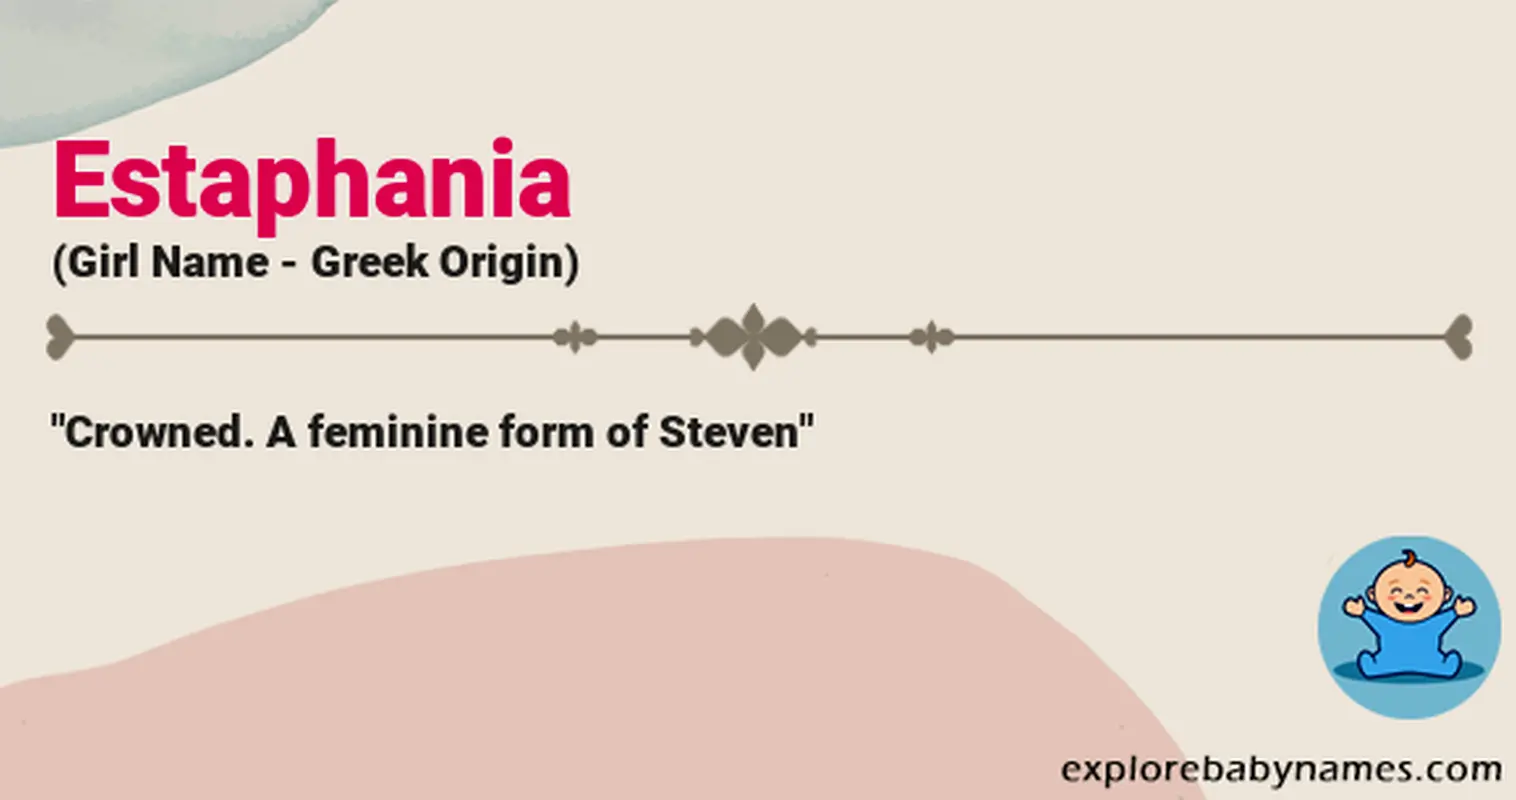 Meaning of Estaphania